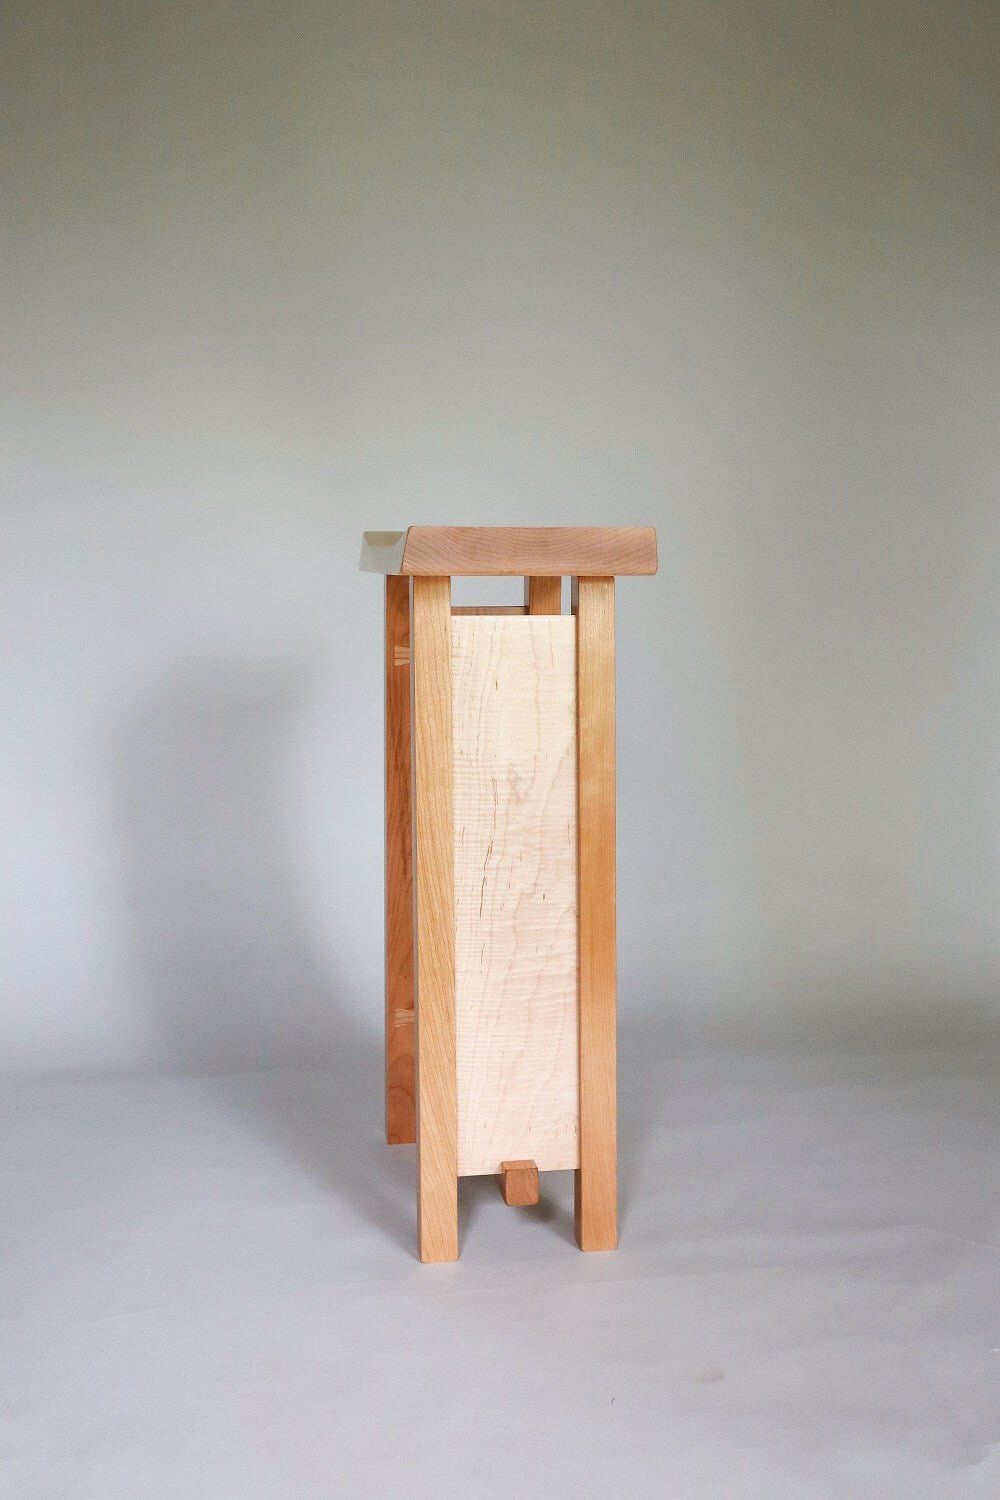 A narrow side table handmade from tiger maple and cherry - modern wood furniture by Mokuzai Furniture